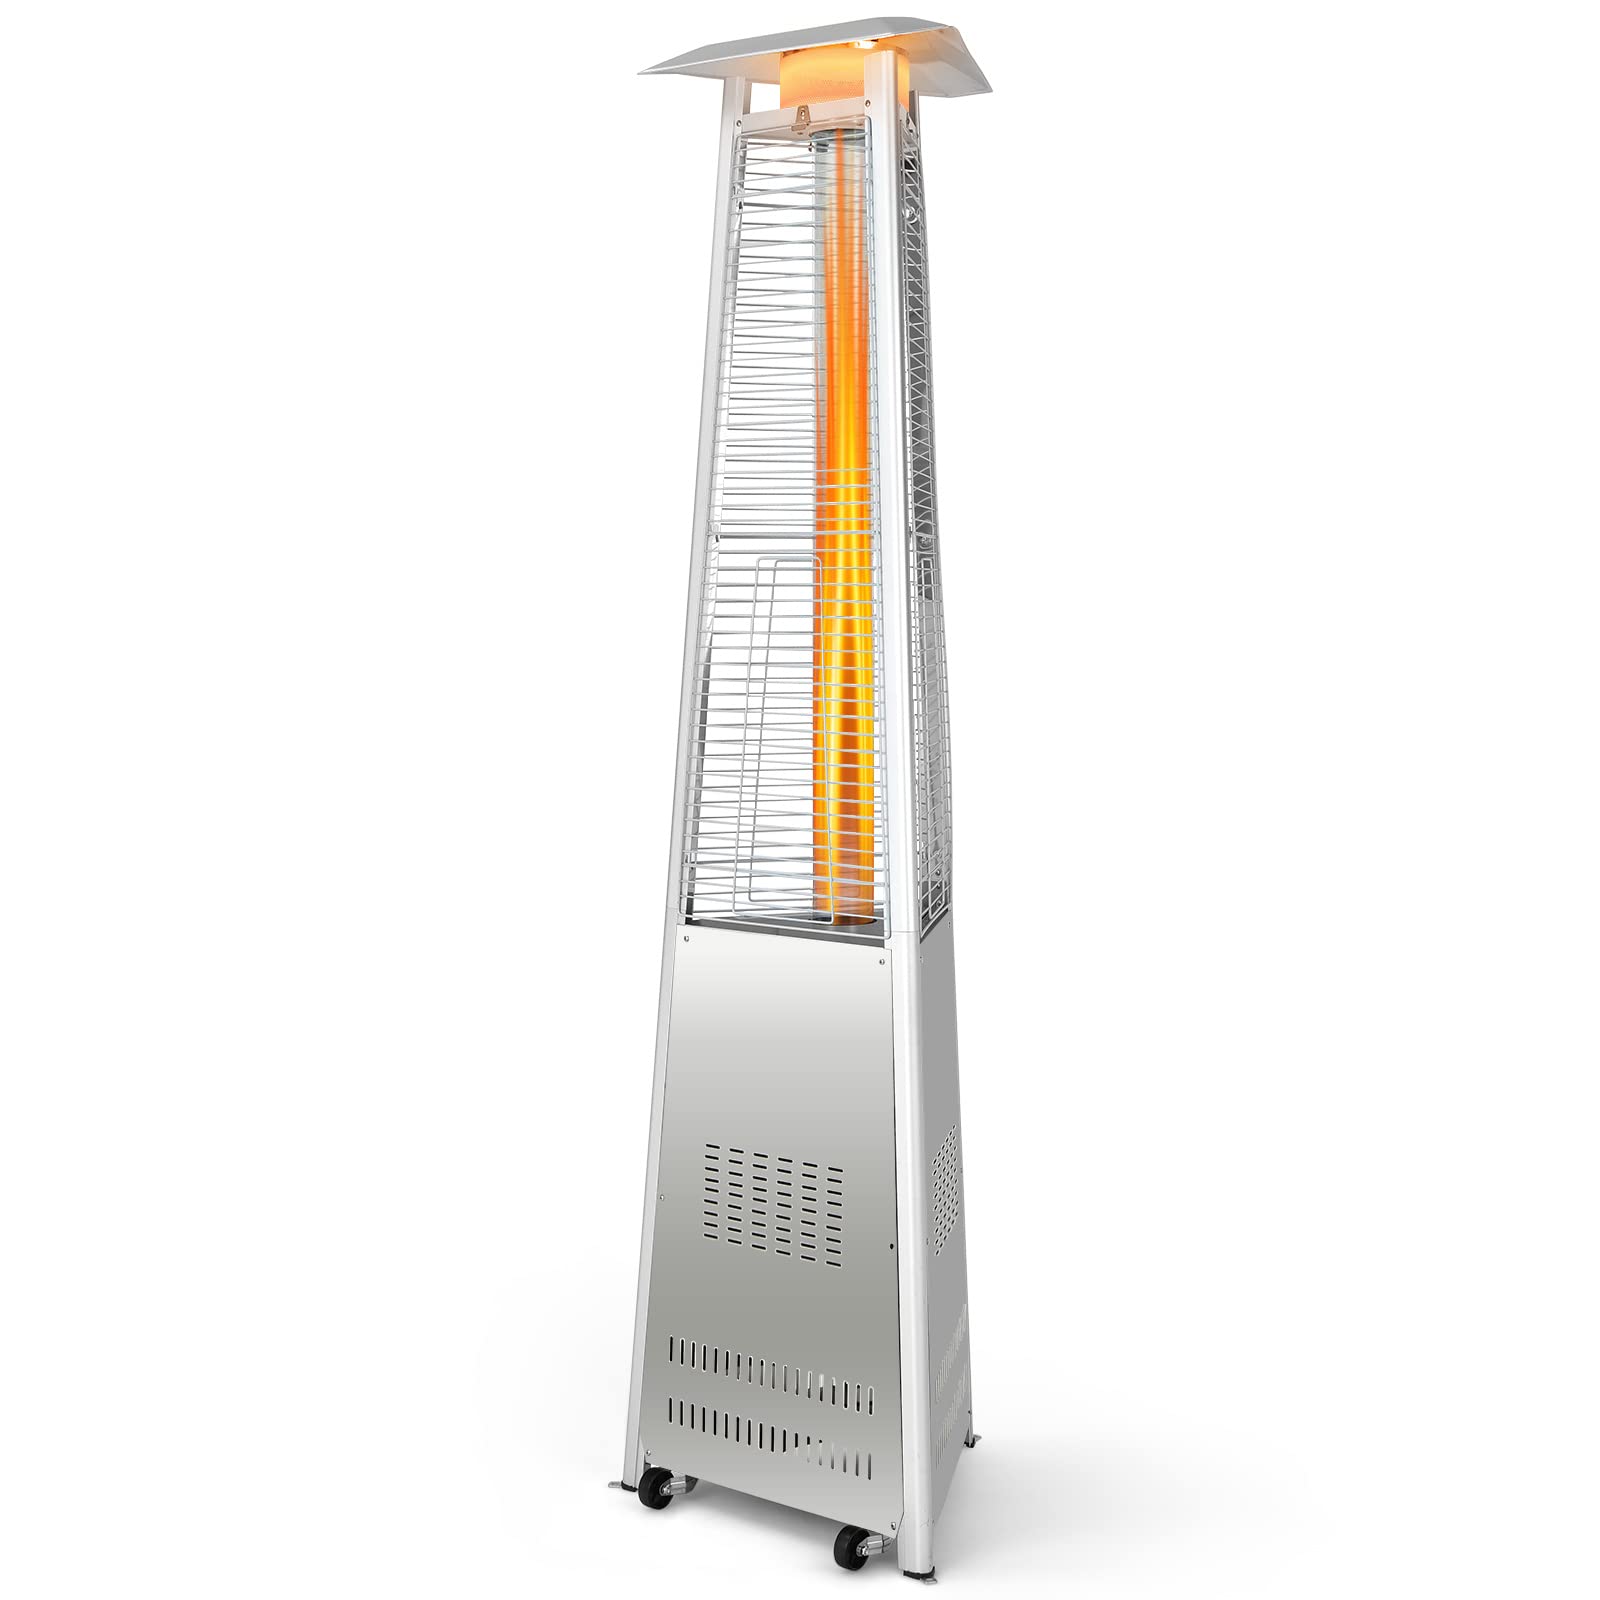 Outdoor Heater with Tip-Over & Flameout Protection for Backyard, Garden (Silver)